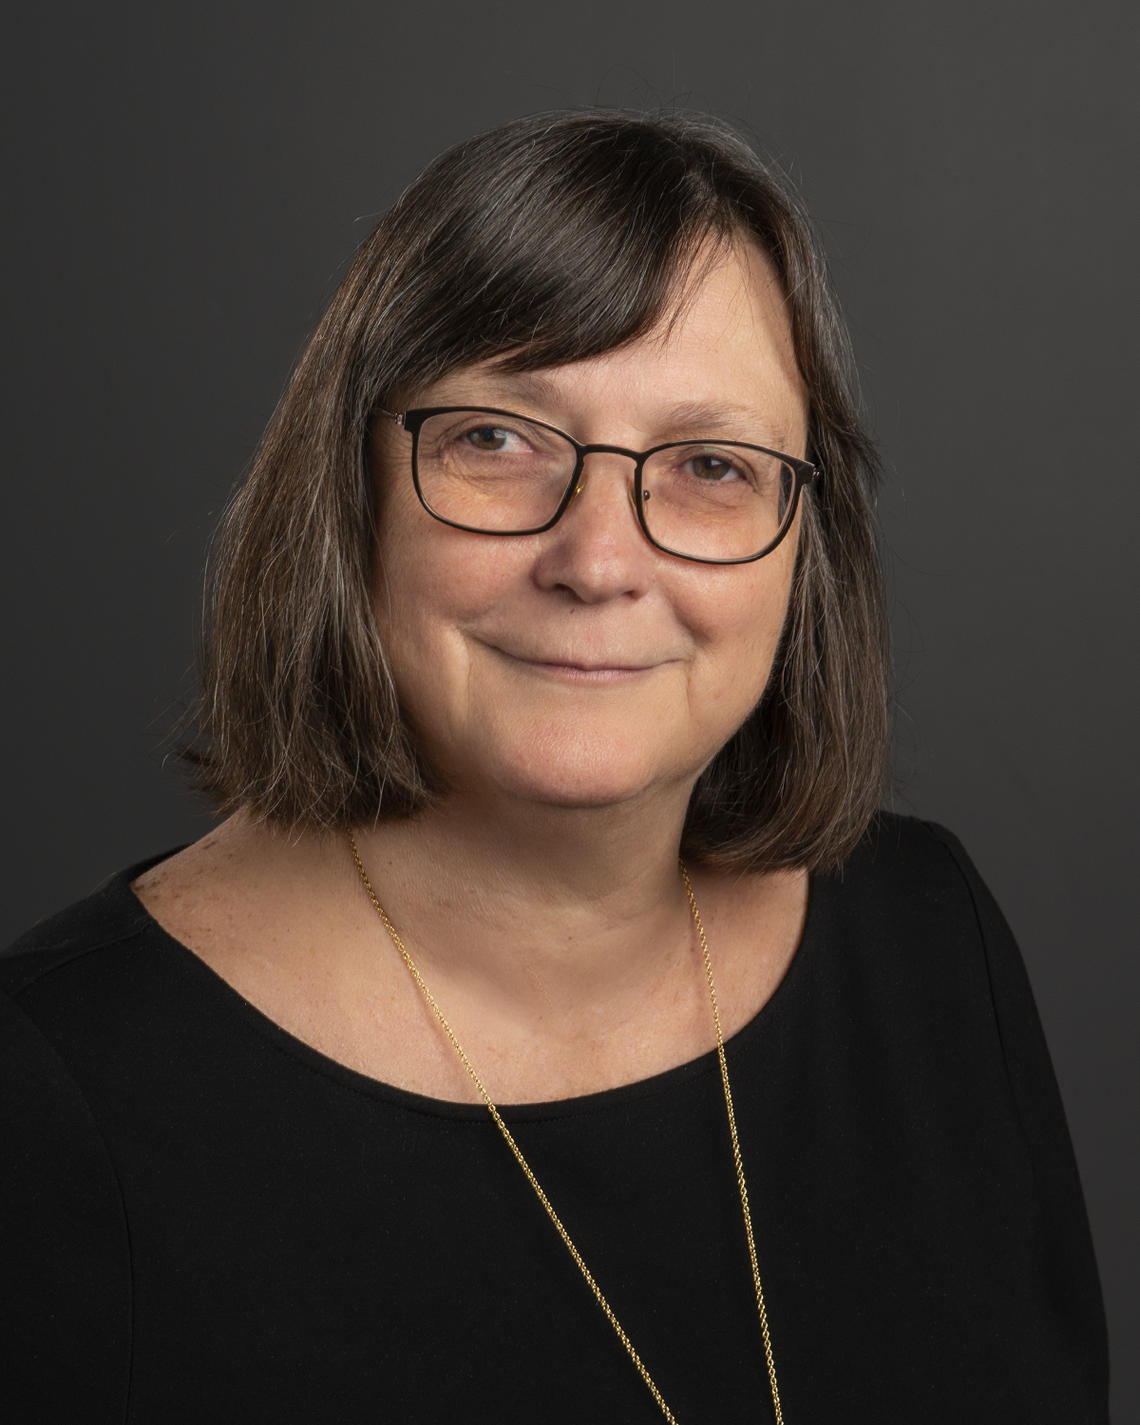 Evelyn Forget, economist, professor, author, and one of Canada’s leading researchers on basic income and Manitoba’s Basic Income Experiment, will be the keynote speaker at the Make it B.I.G. public forum on Thursday, May 30.